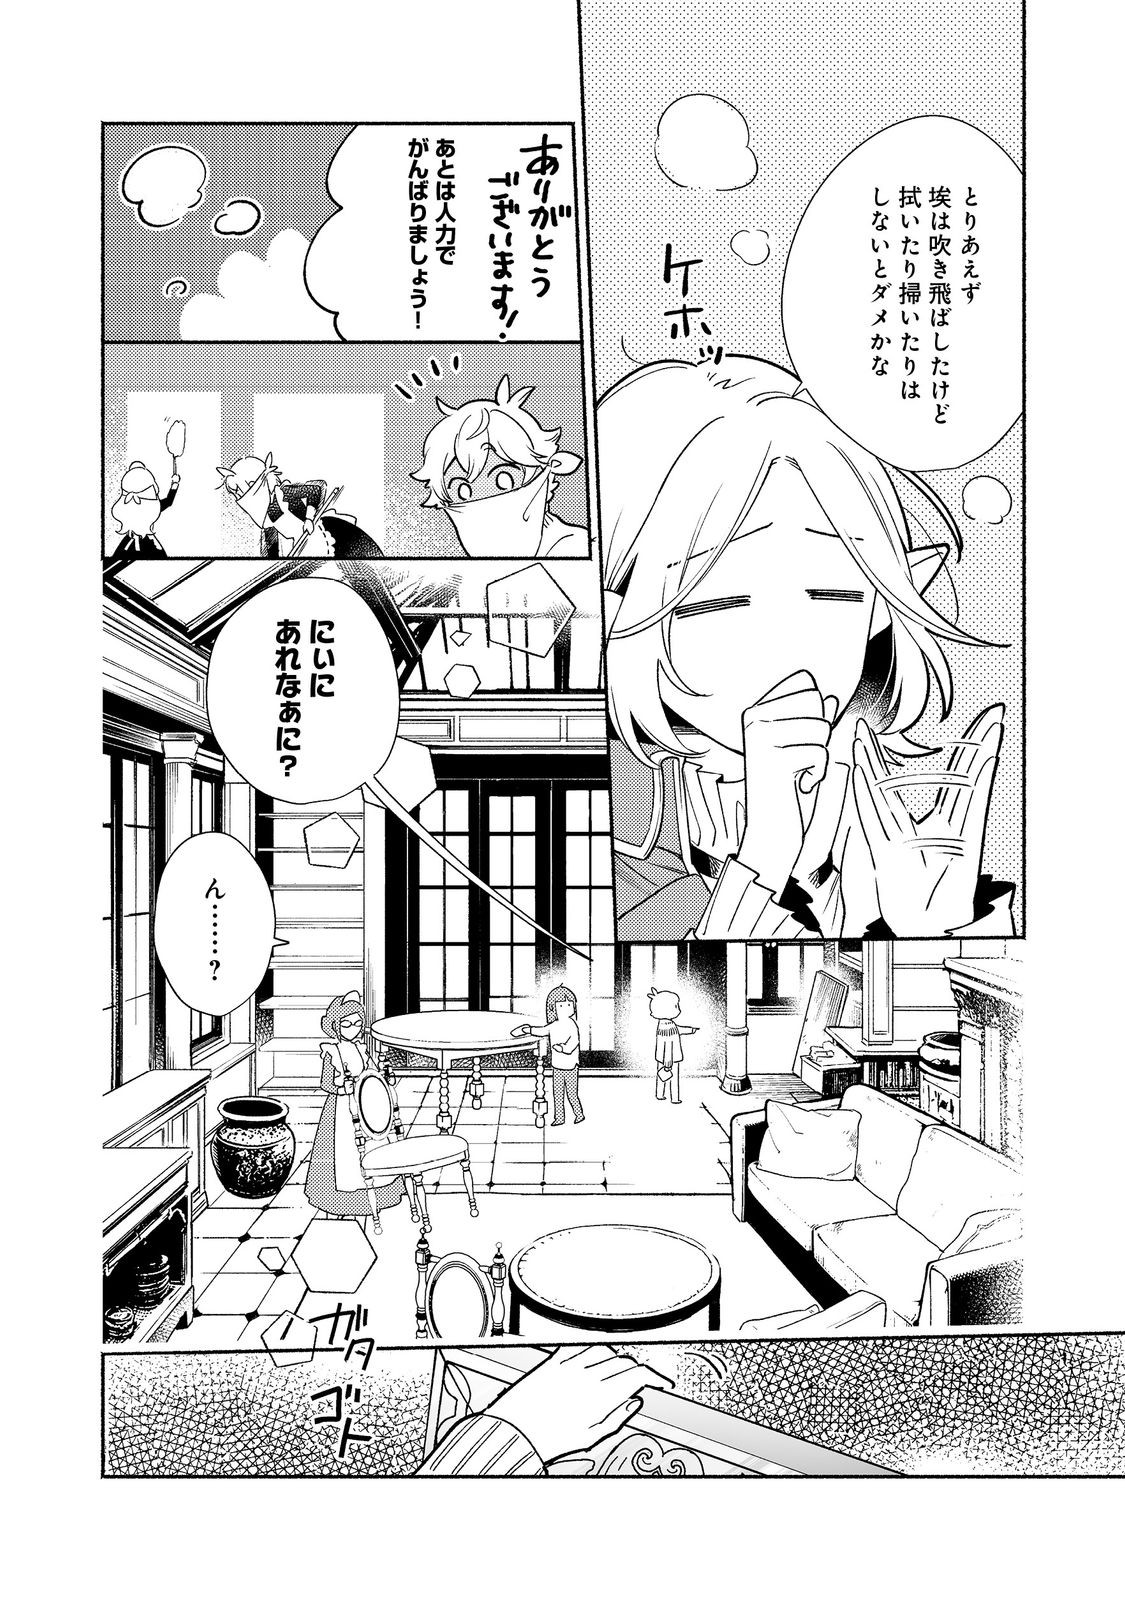 I’m the White Pig Nobleman 第27.1話 - Page 12